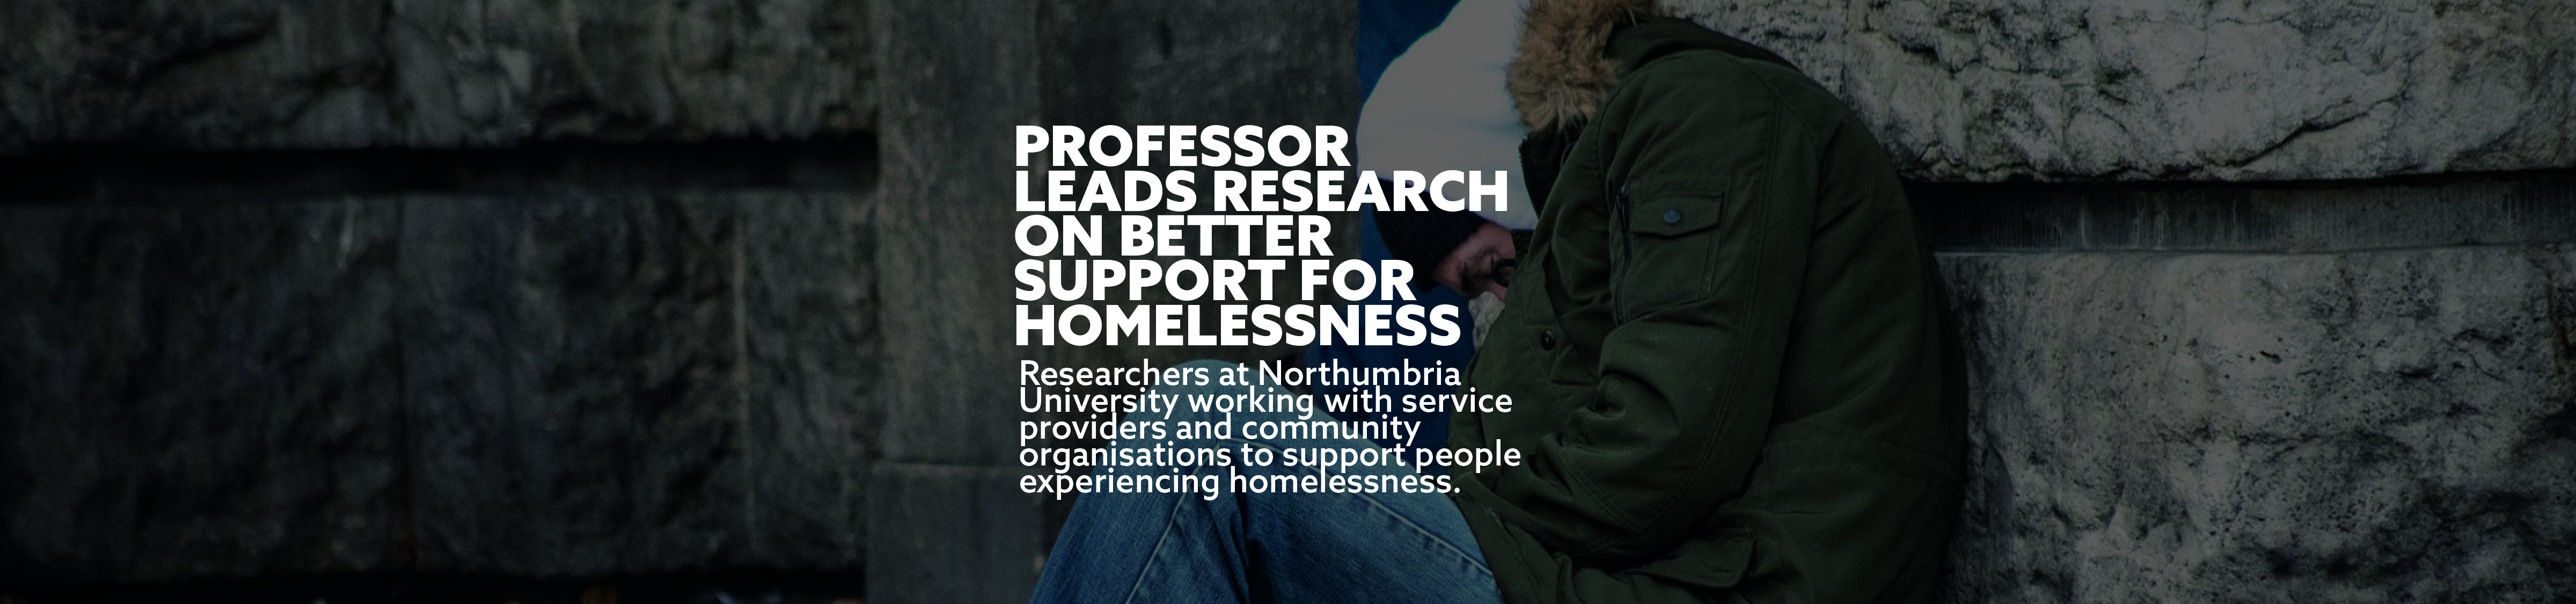 Professor leads research on better support for homelessness